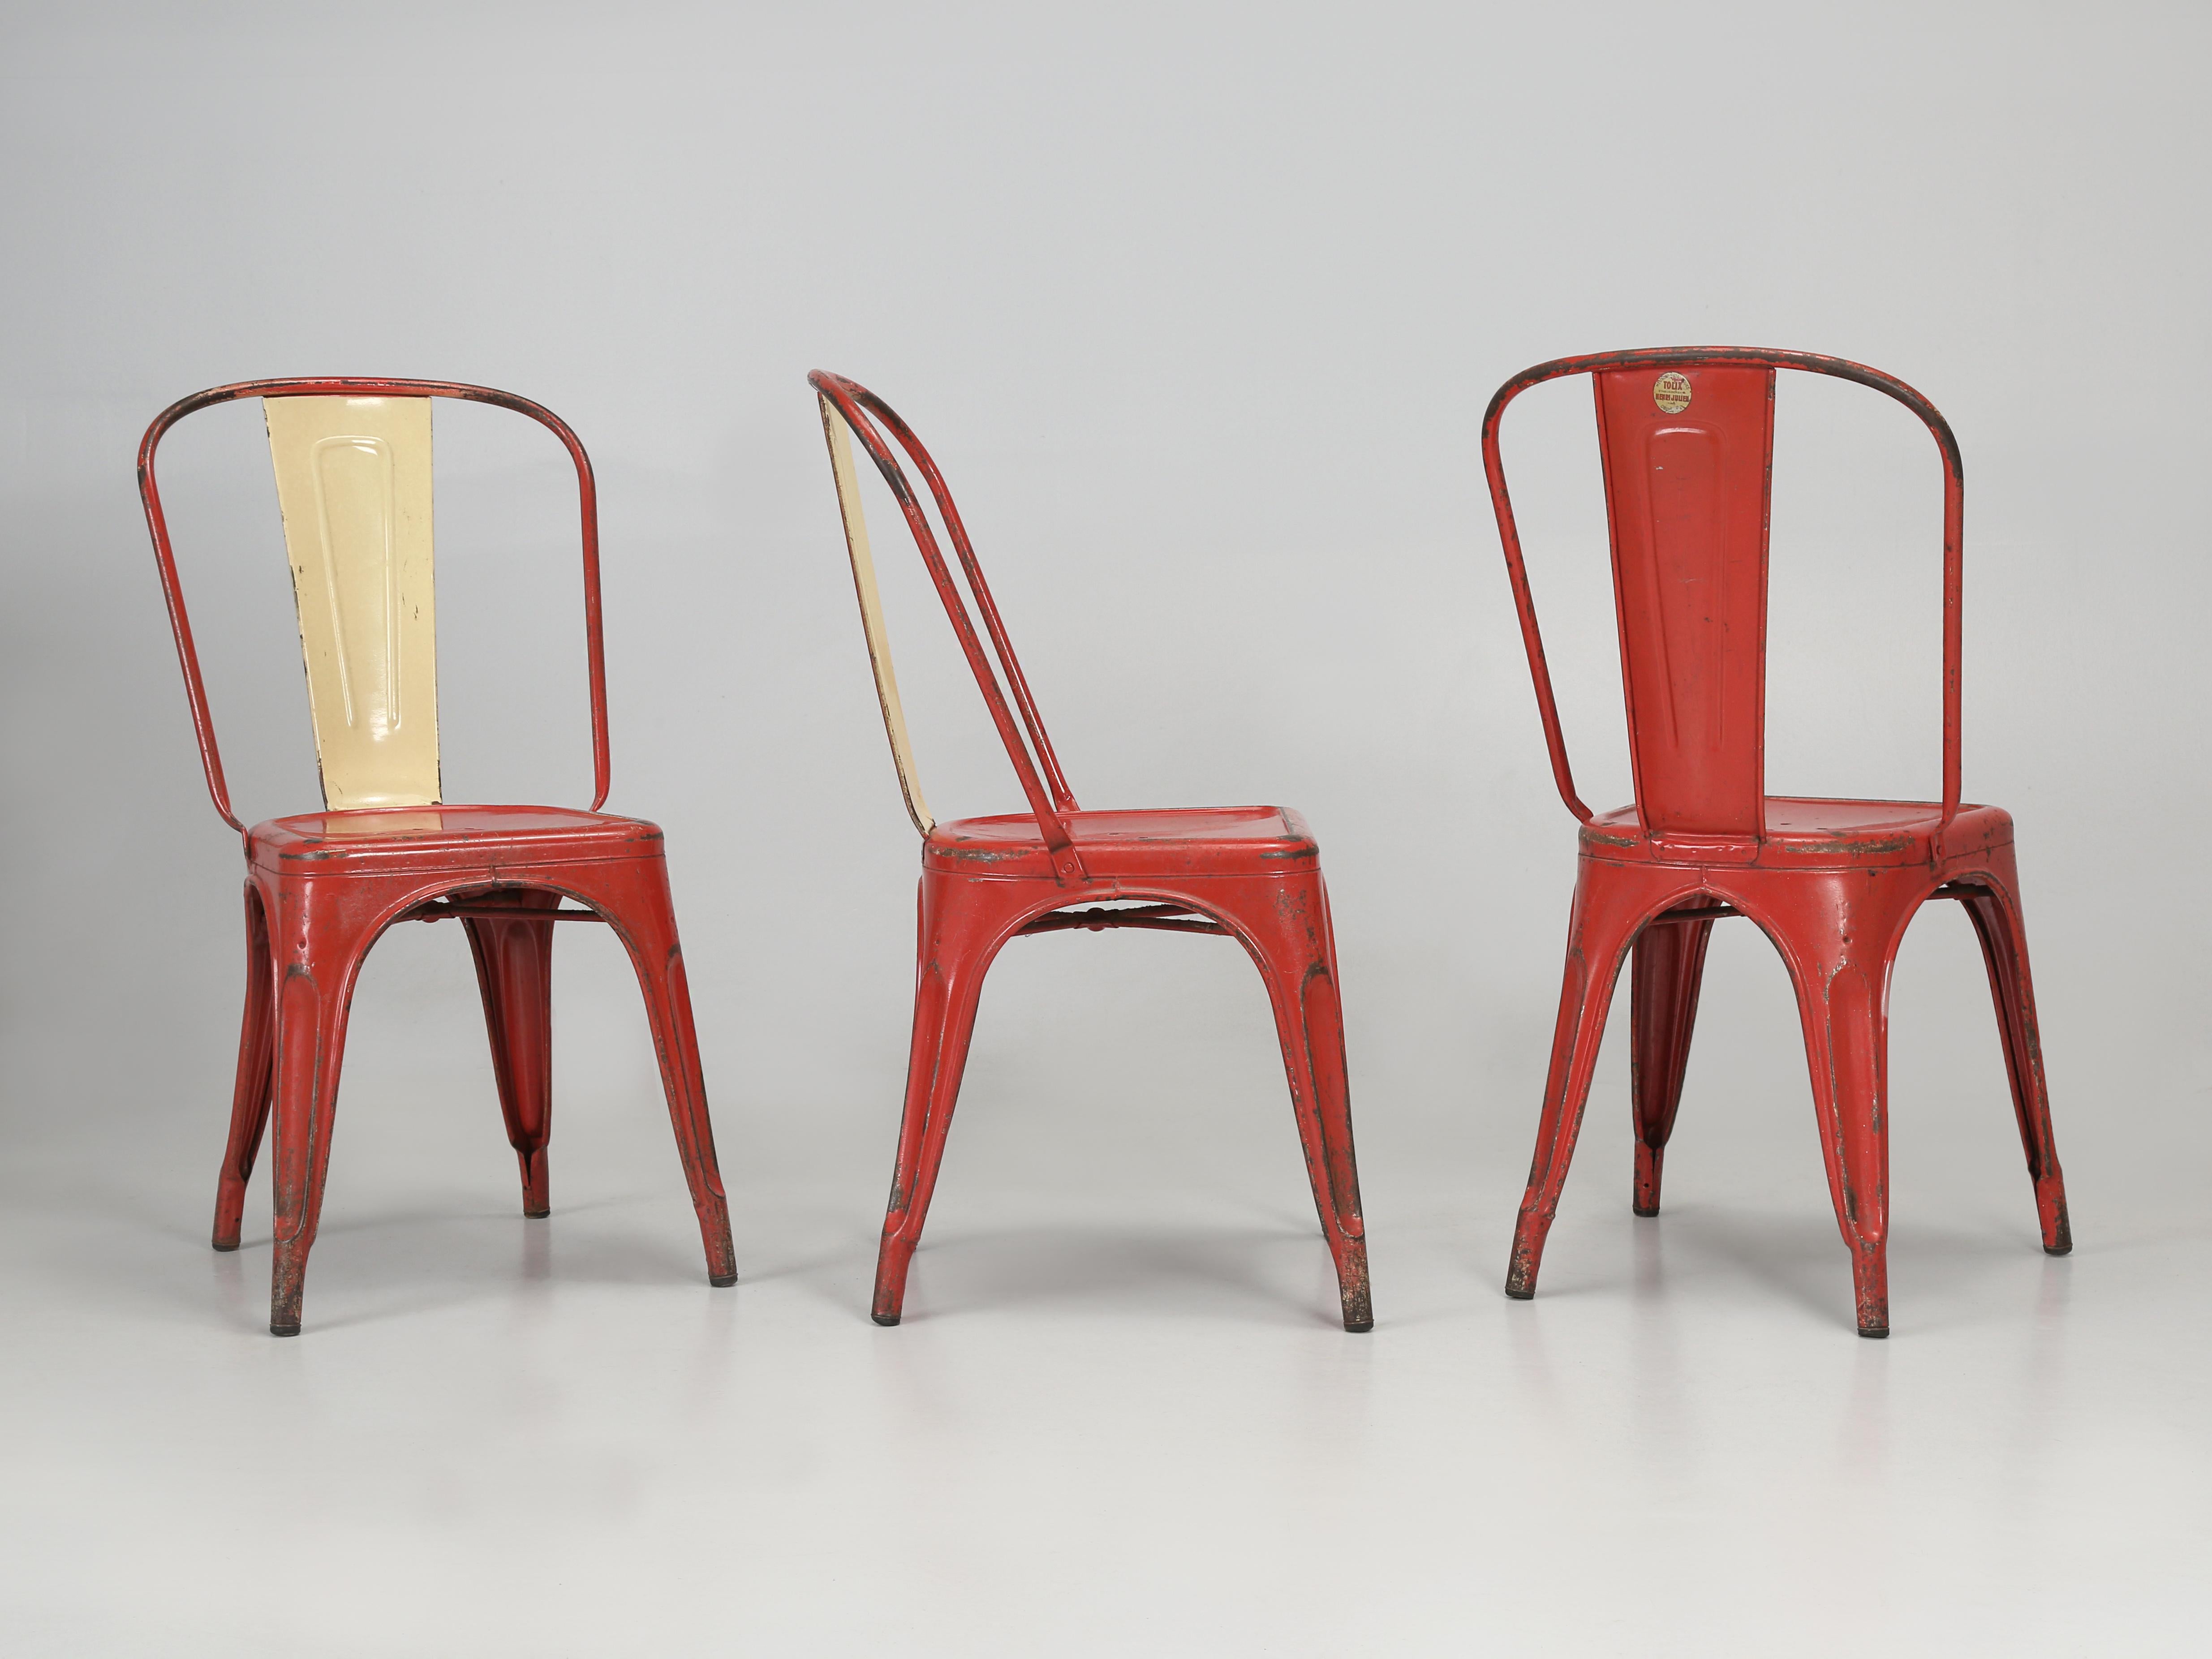 Authentic set of (6) tolix steel stacking chairs circa 1950s made by hand in Europe, some with the Tolix sticker still on the back. The original paint is heavily distressed and does vary greatly from one tolix chair to another. Tolix states that you